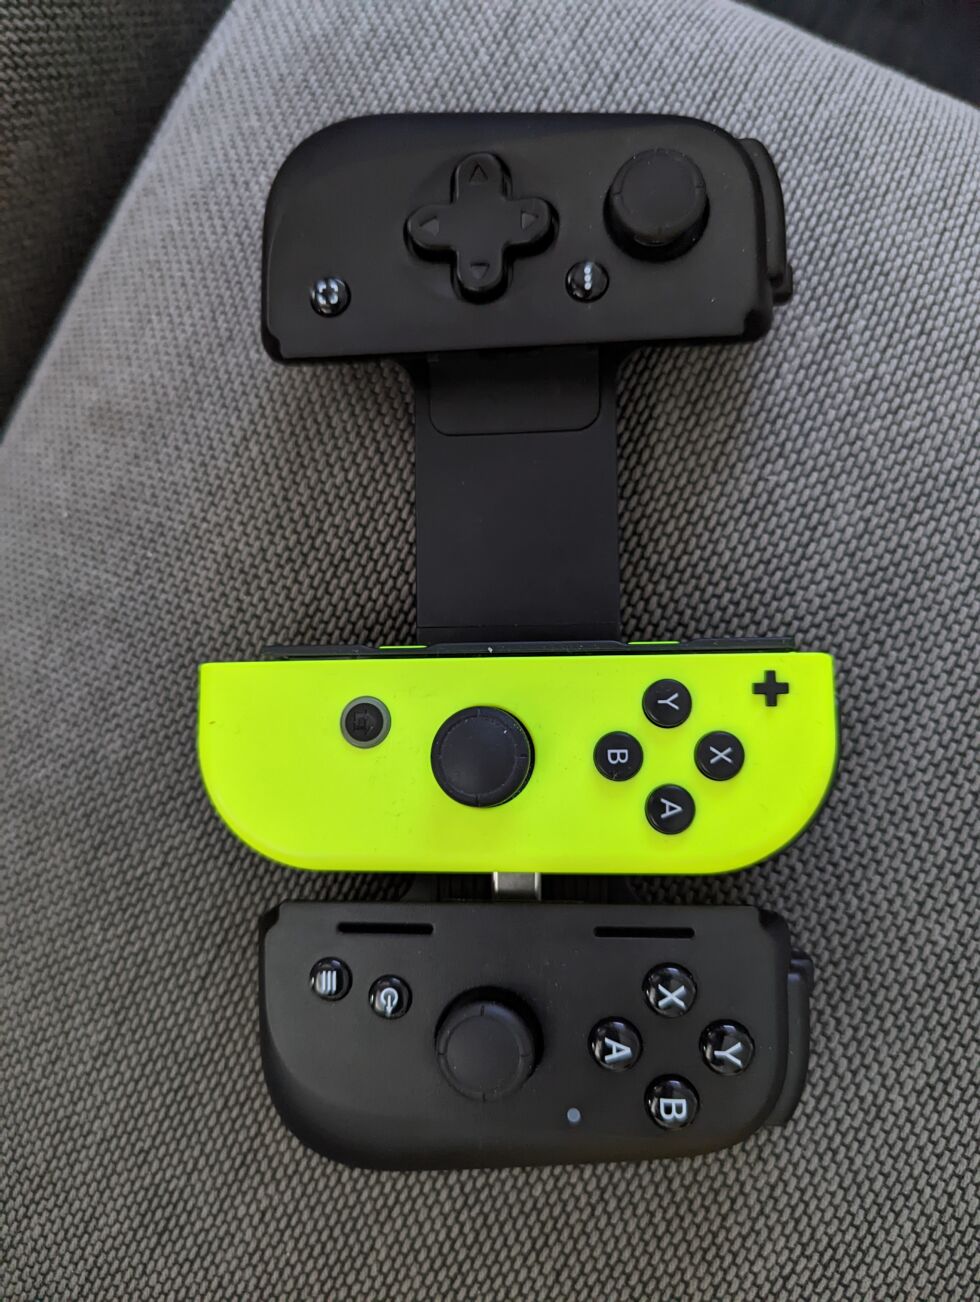 A photo to clarify my point about the distance between the ABXY array and the joystick;  Kishi V2 compared to a Switch Joy-Con.